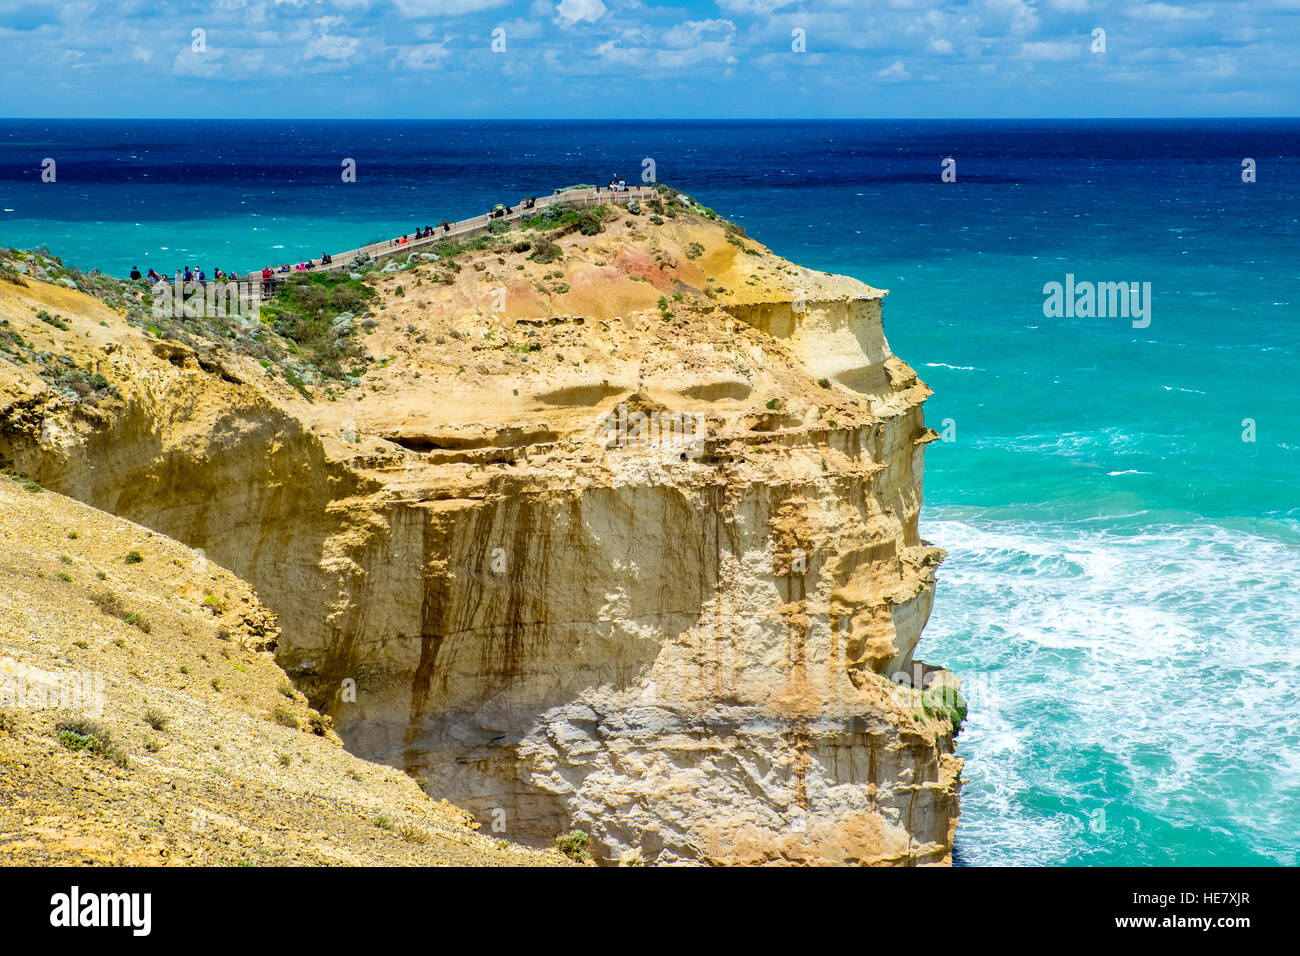 Tourists at the viewing point for The Twelve Apostles on Australia's Great Ocean Road Stock Photo